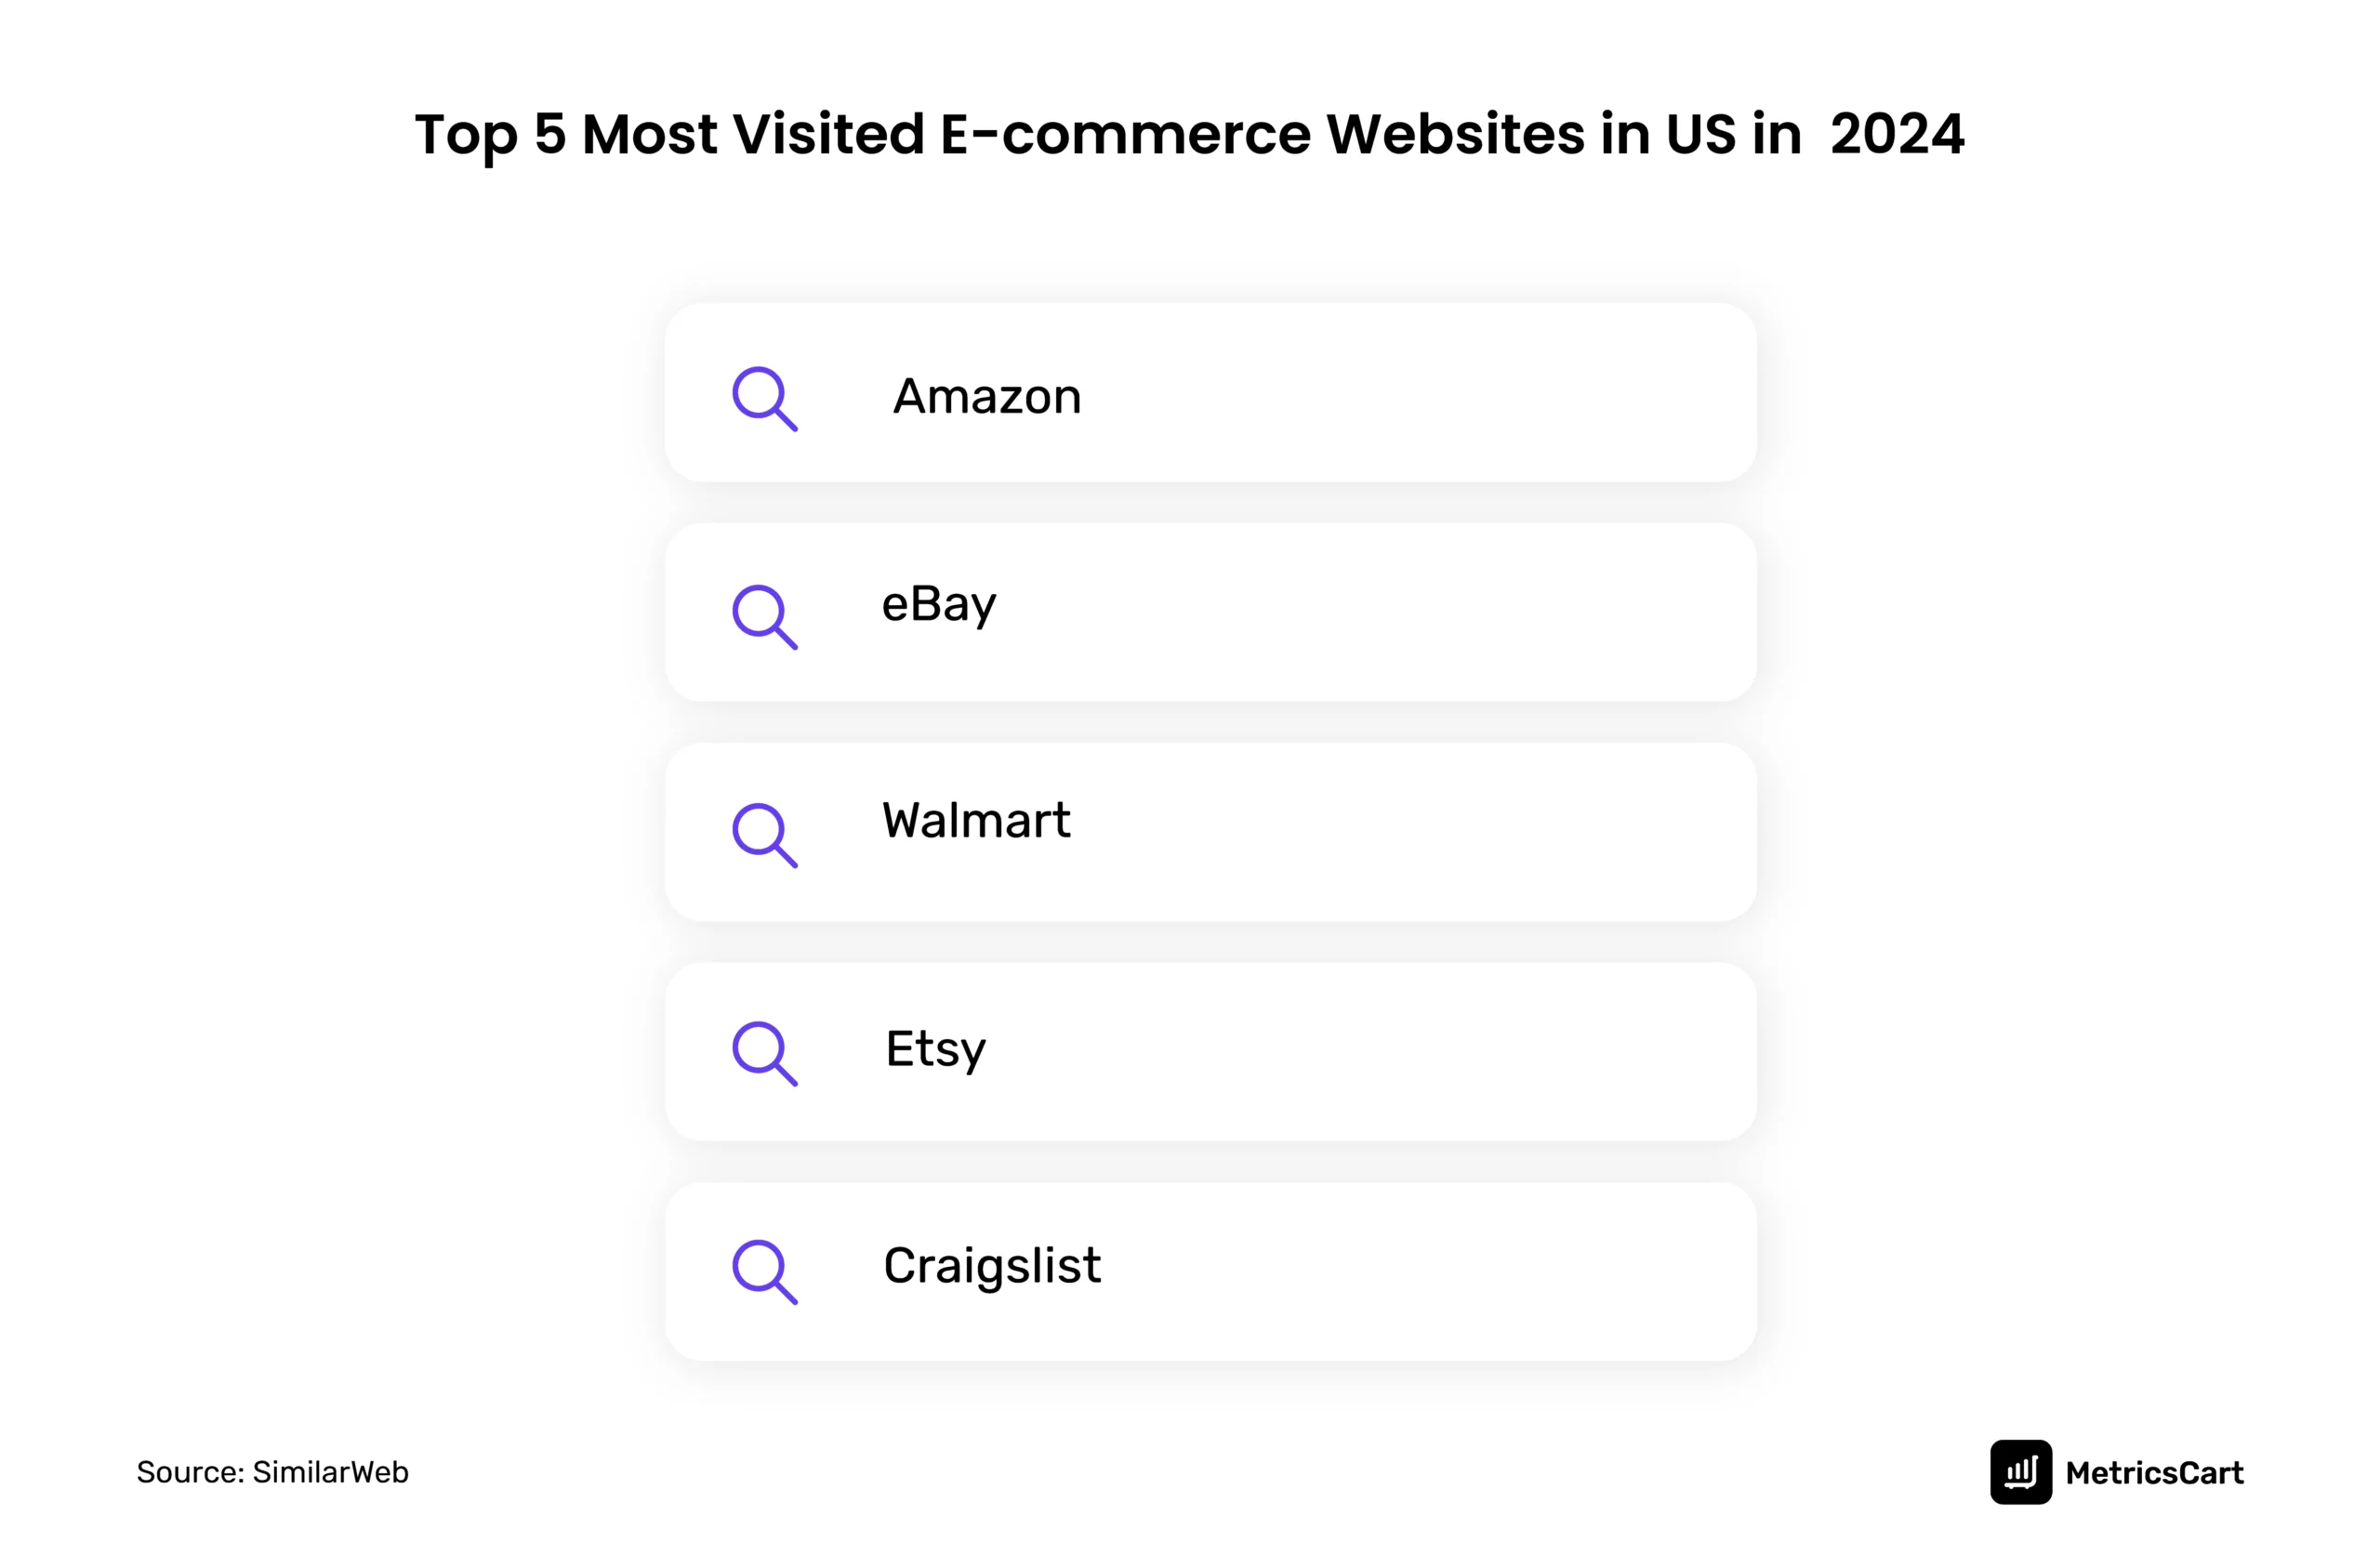 the images show the top 5 websites in the US with high traffic in 2024 